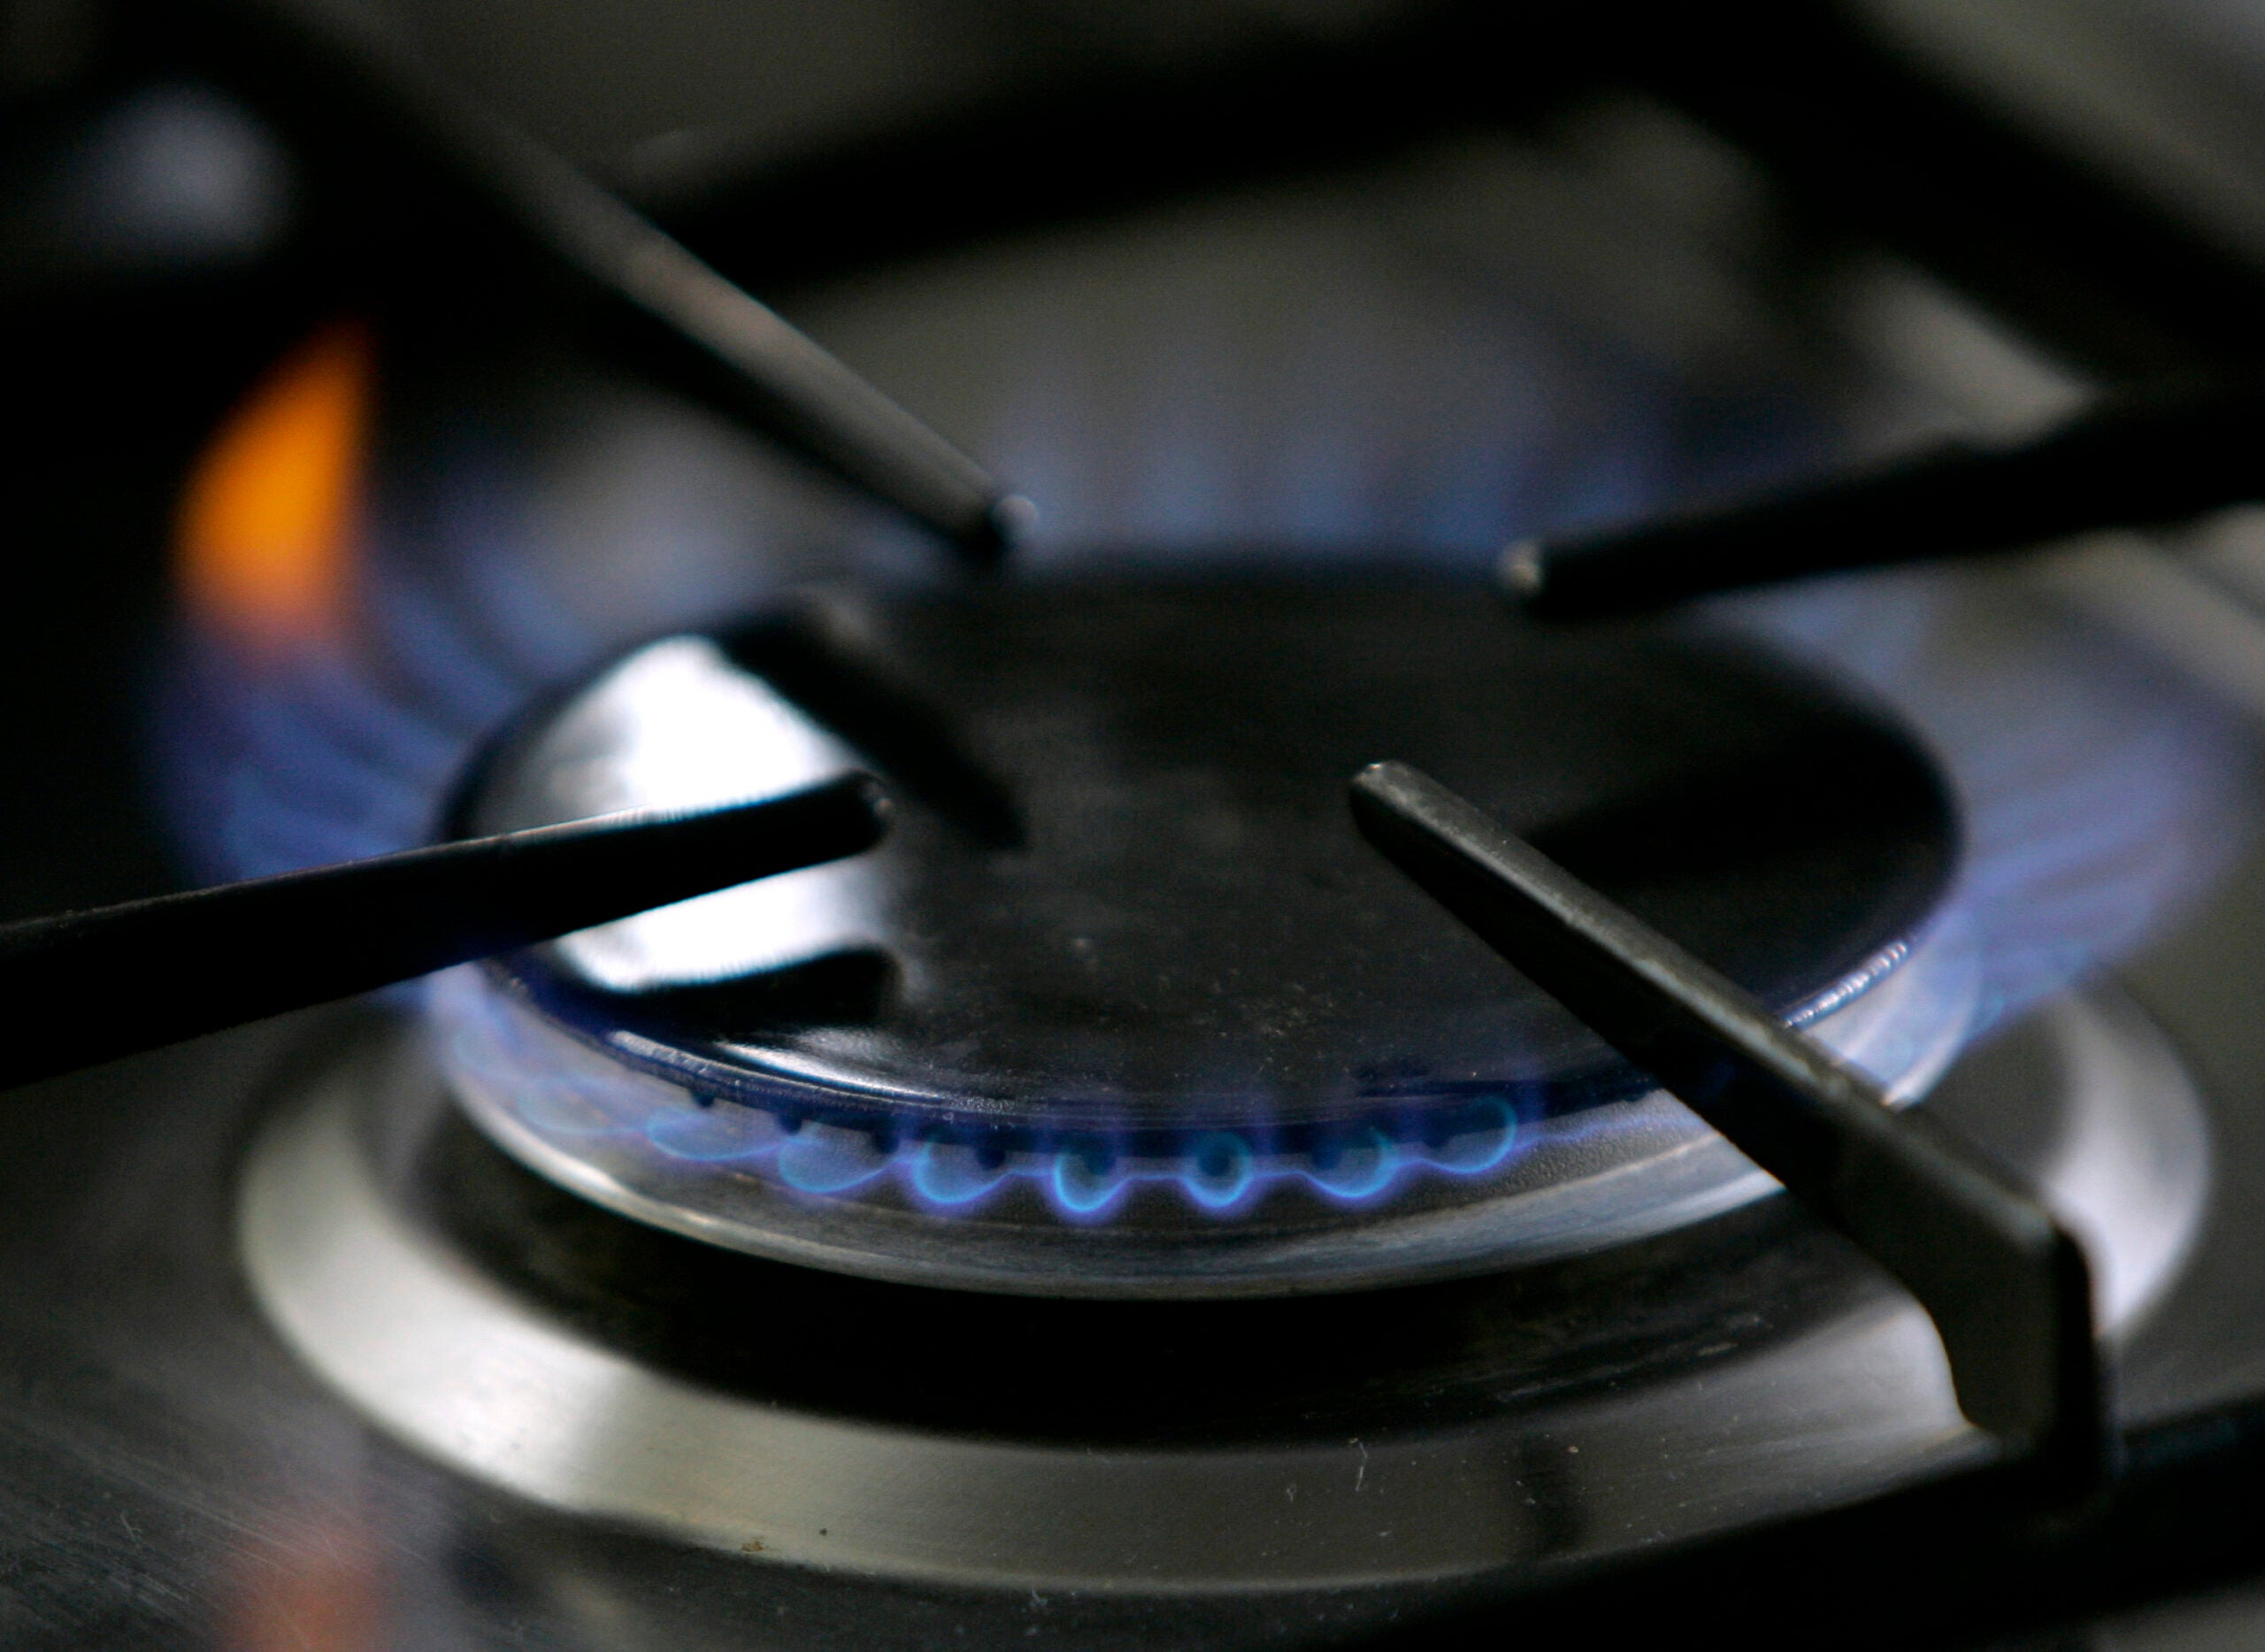 How electric stoves are poised to dethrone the mighty gas range